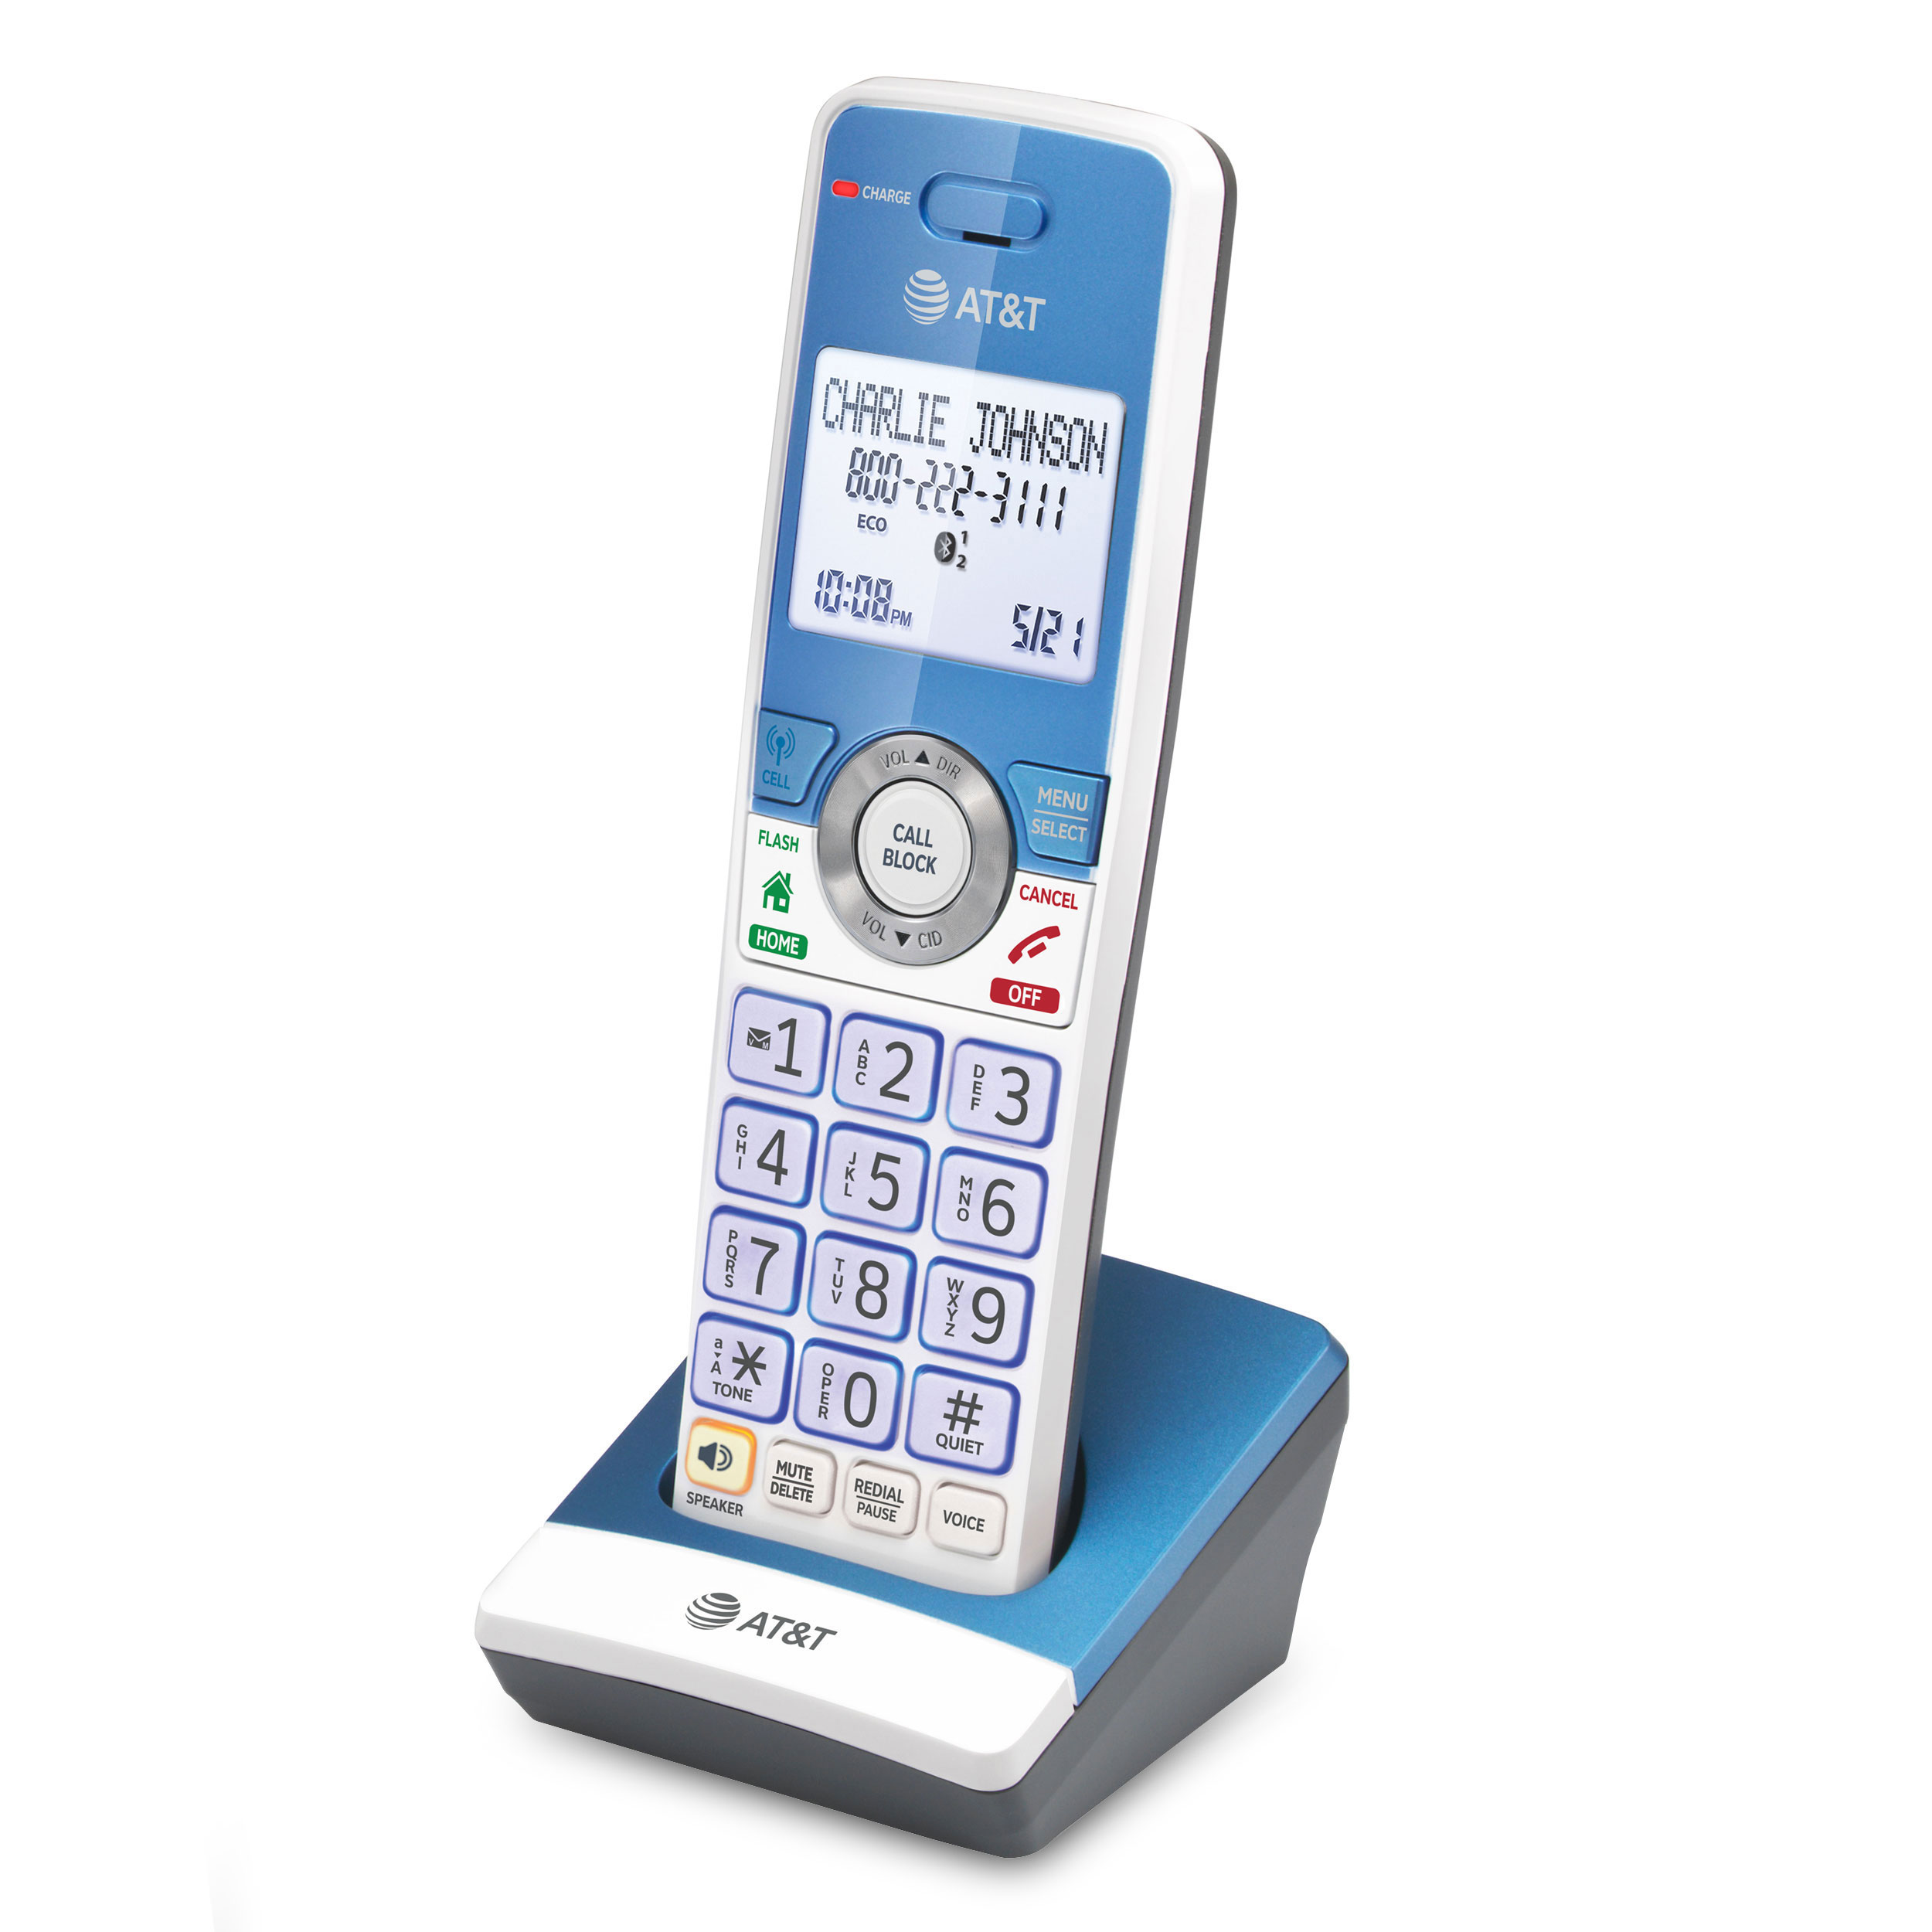 Accessory Handset with Unsurpassed Range, Bluetooth Connect to Cell, and Smart Call Blocker (Blue) - view 3